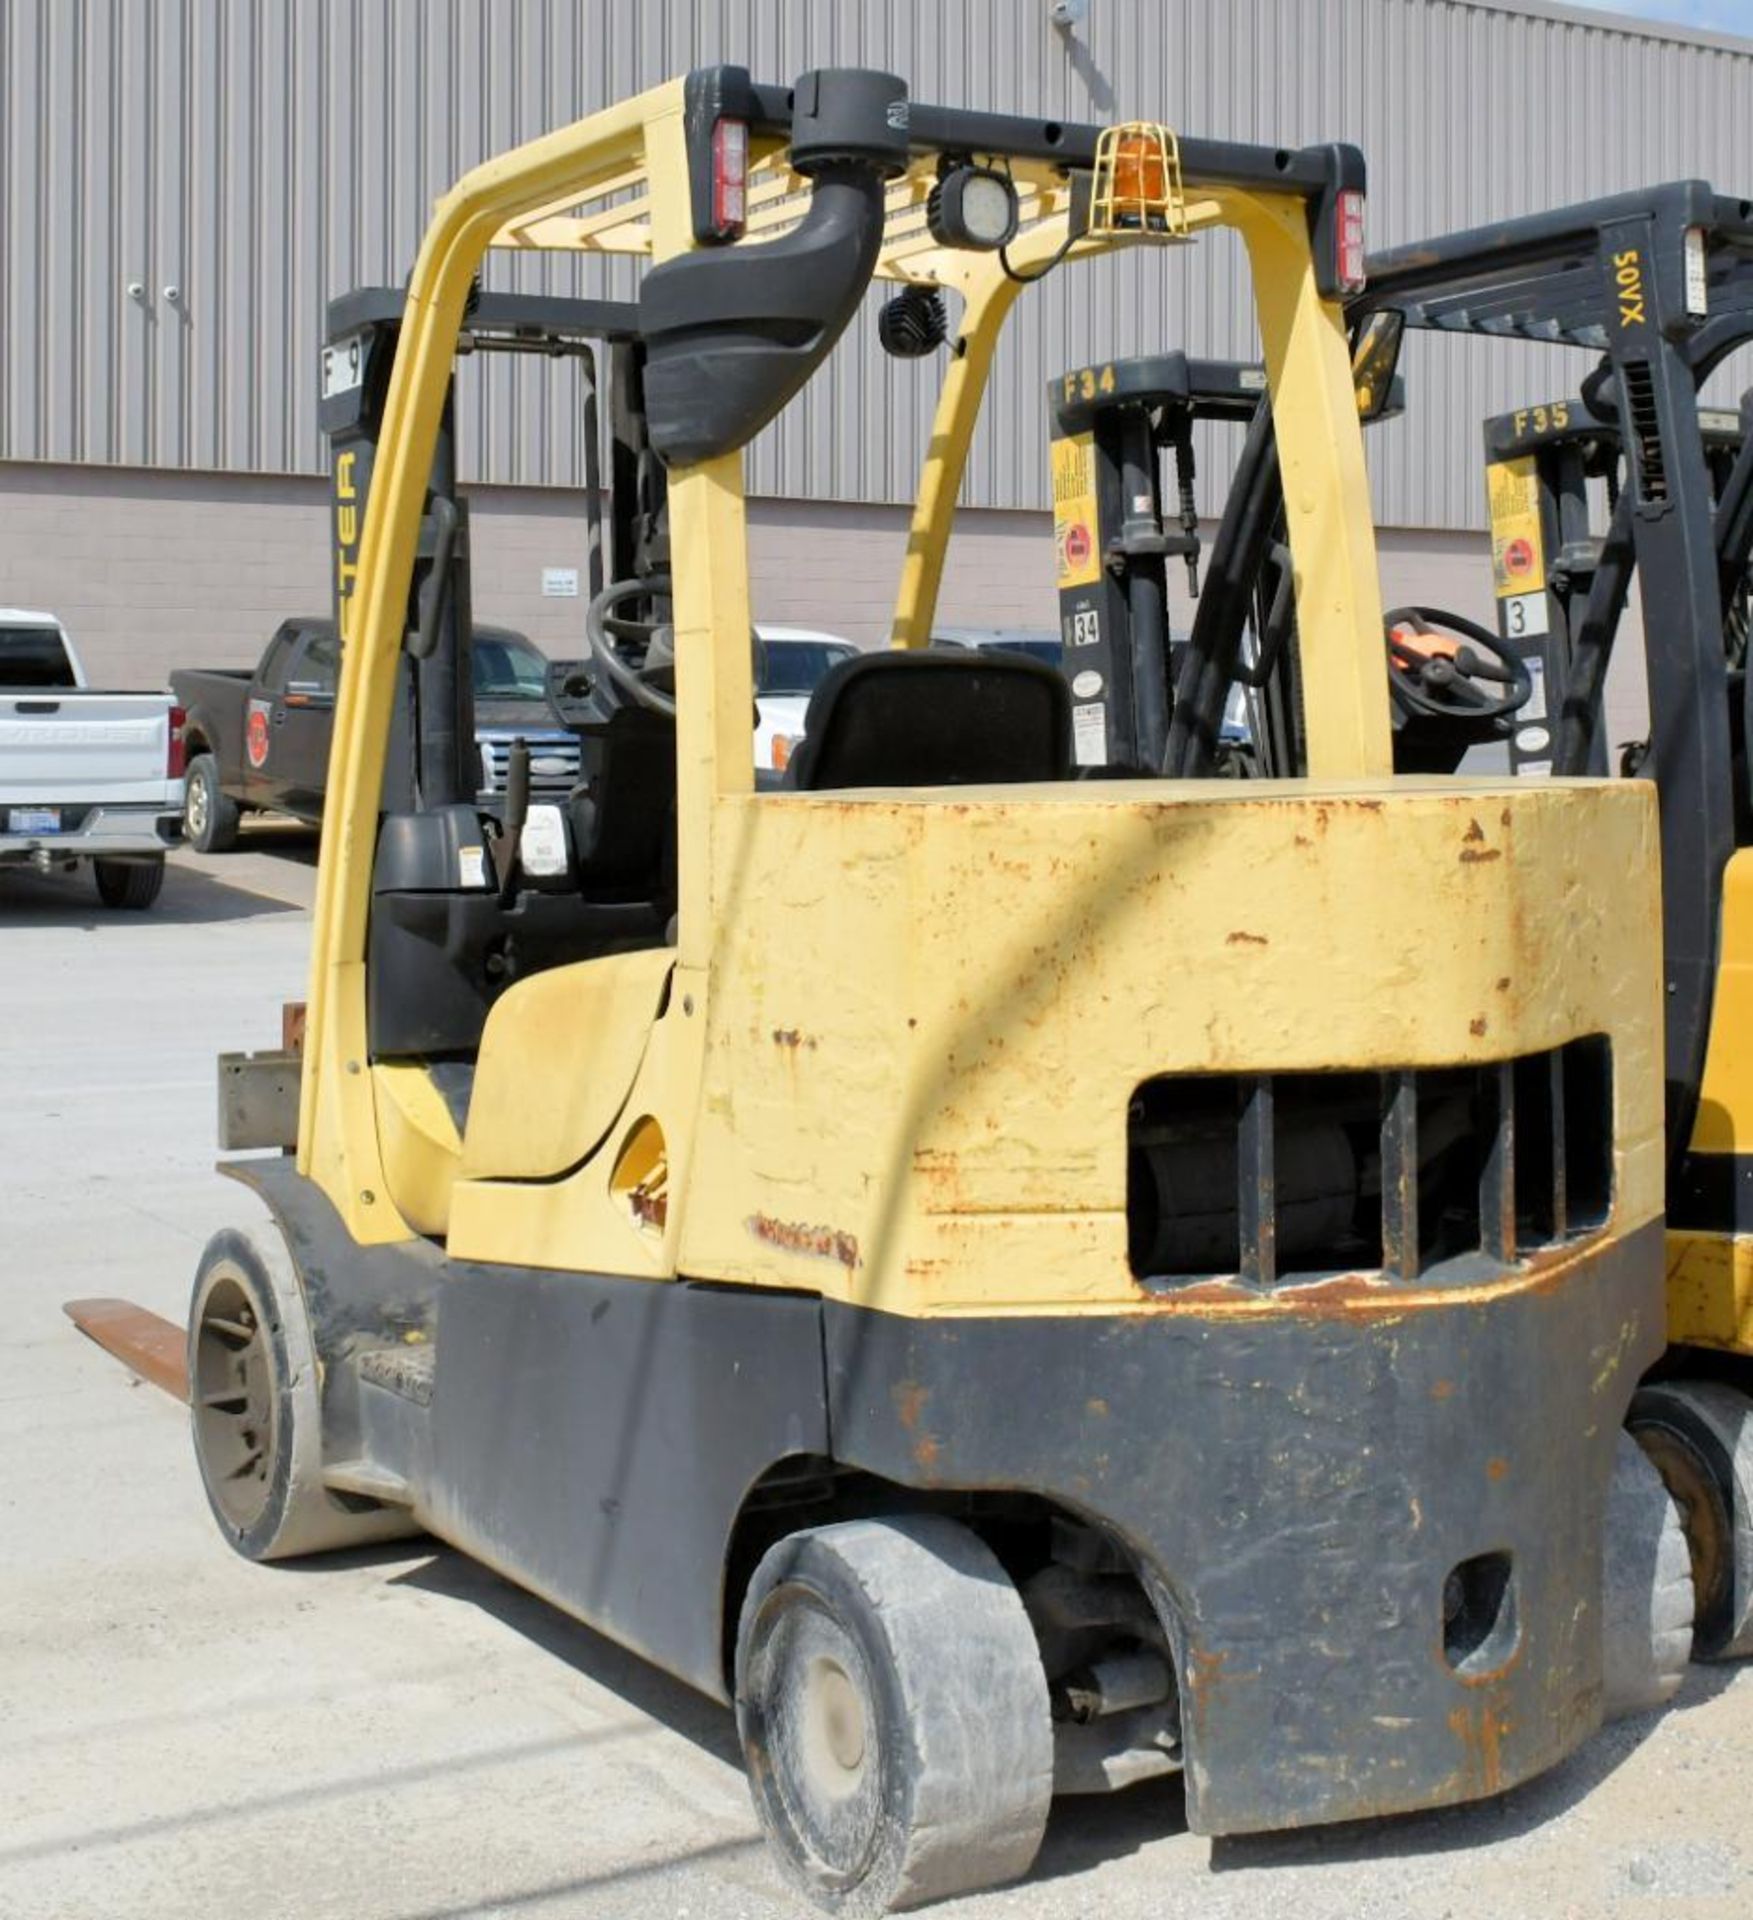 Hyster Model S120FTS, 11,950-Lbs. x 111.2" Lift Capacity Gasoline Engine Fork Lift Truck